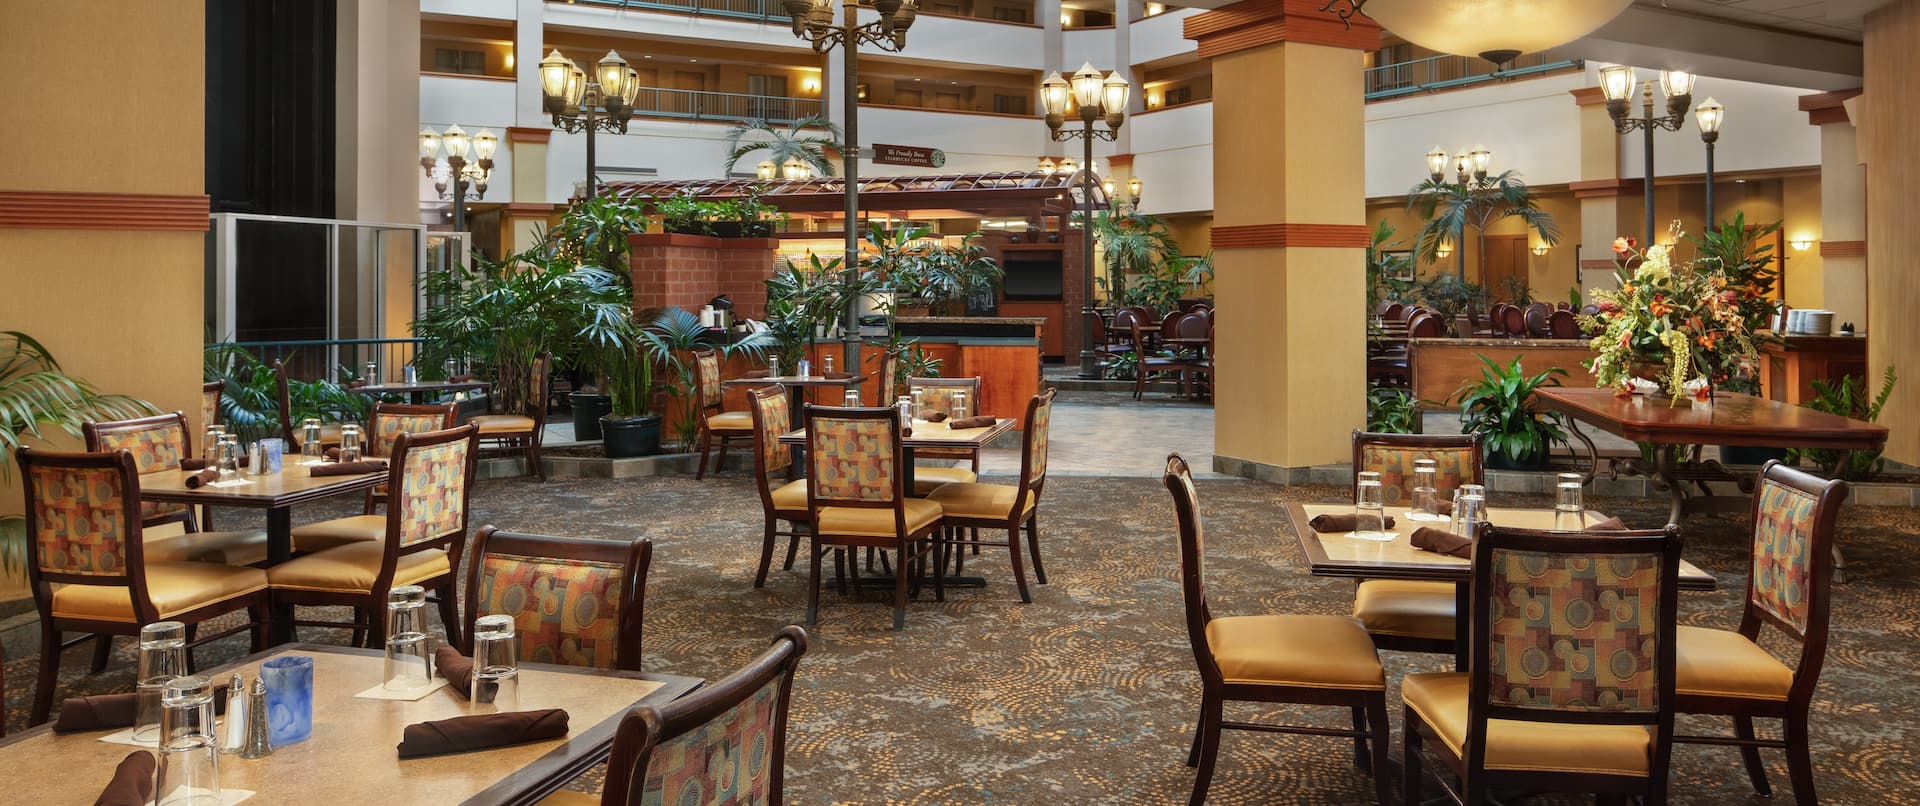 The Palmtree Grille Dining Area